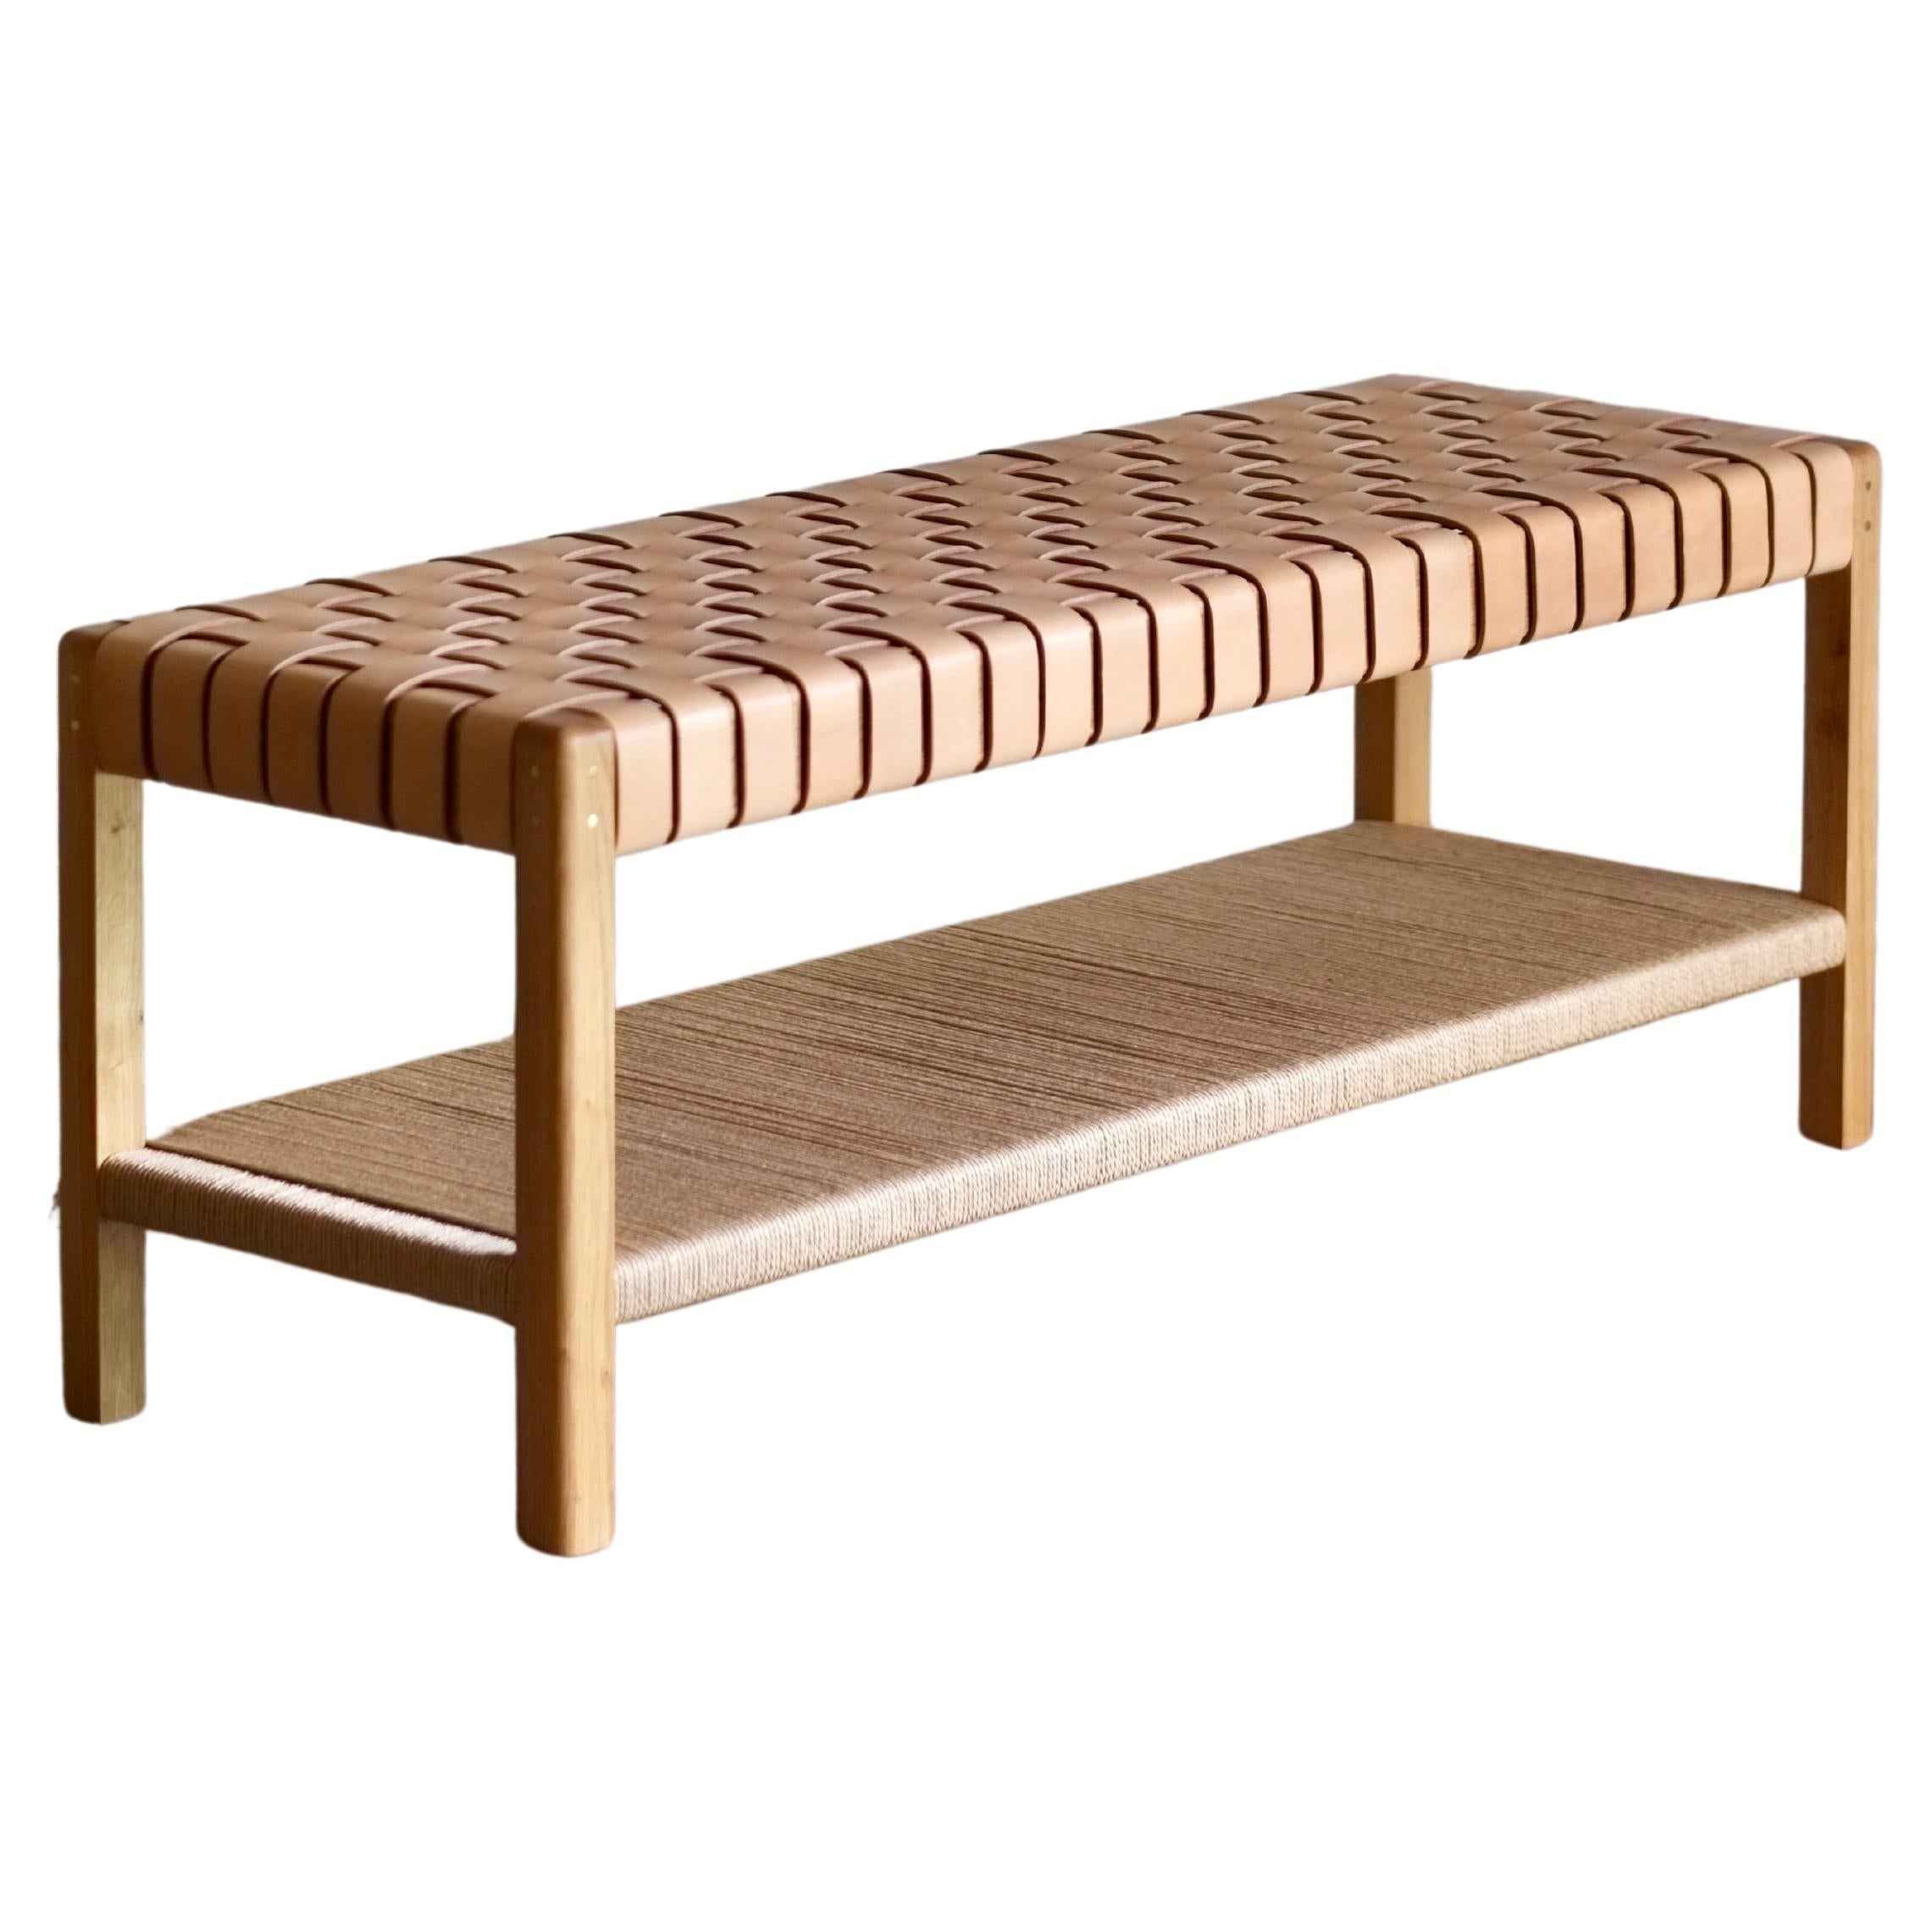 Cinch Russet Woven Leather Bench